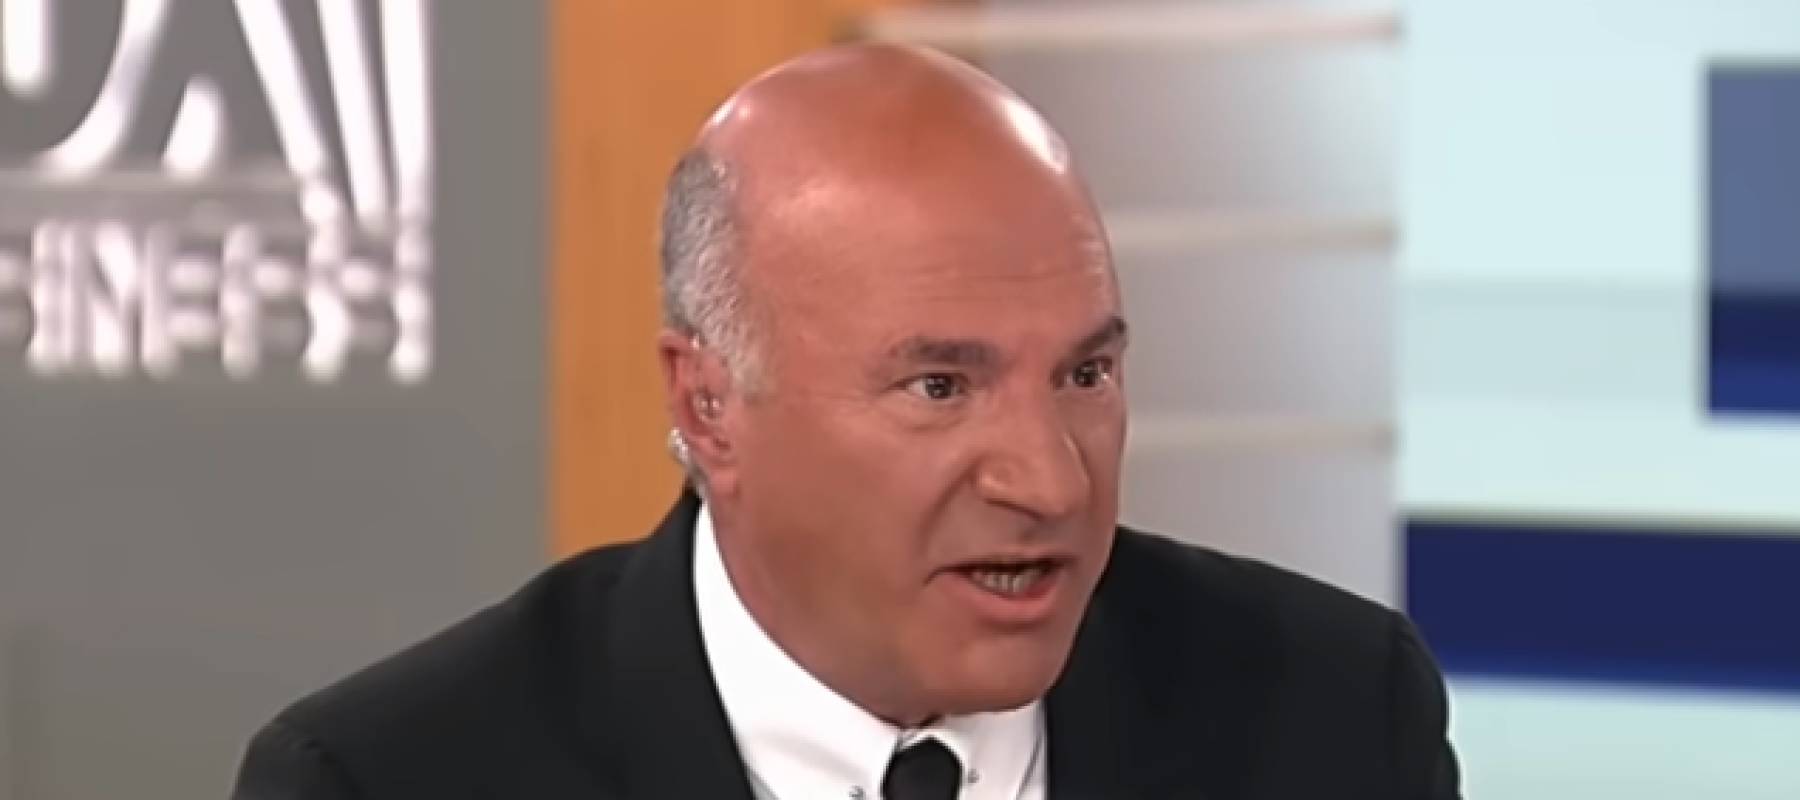 Kevin O&#039;Leary seen on set of Fox Business, looking to the side of the camera in the middle of speaking.